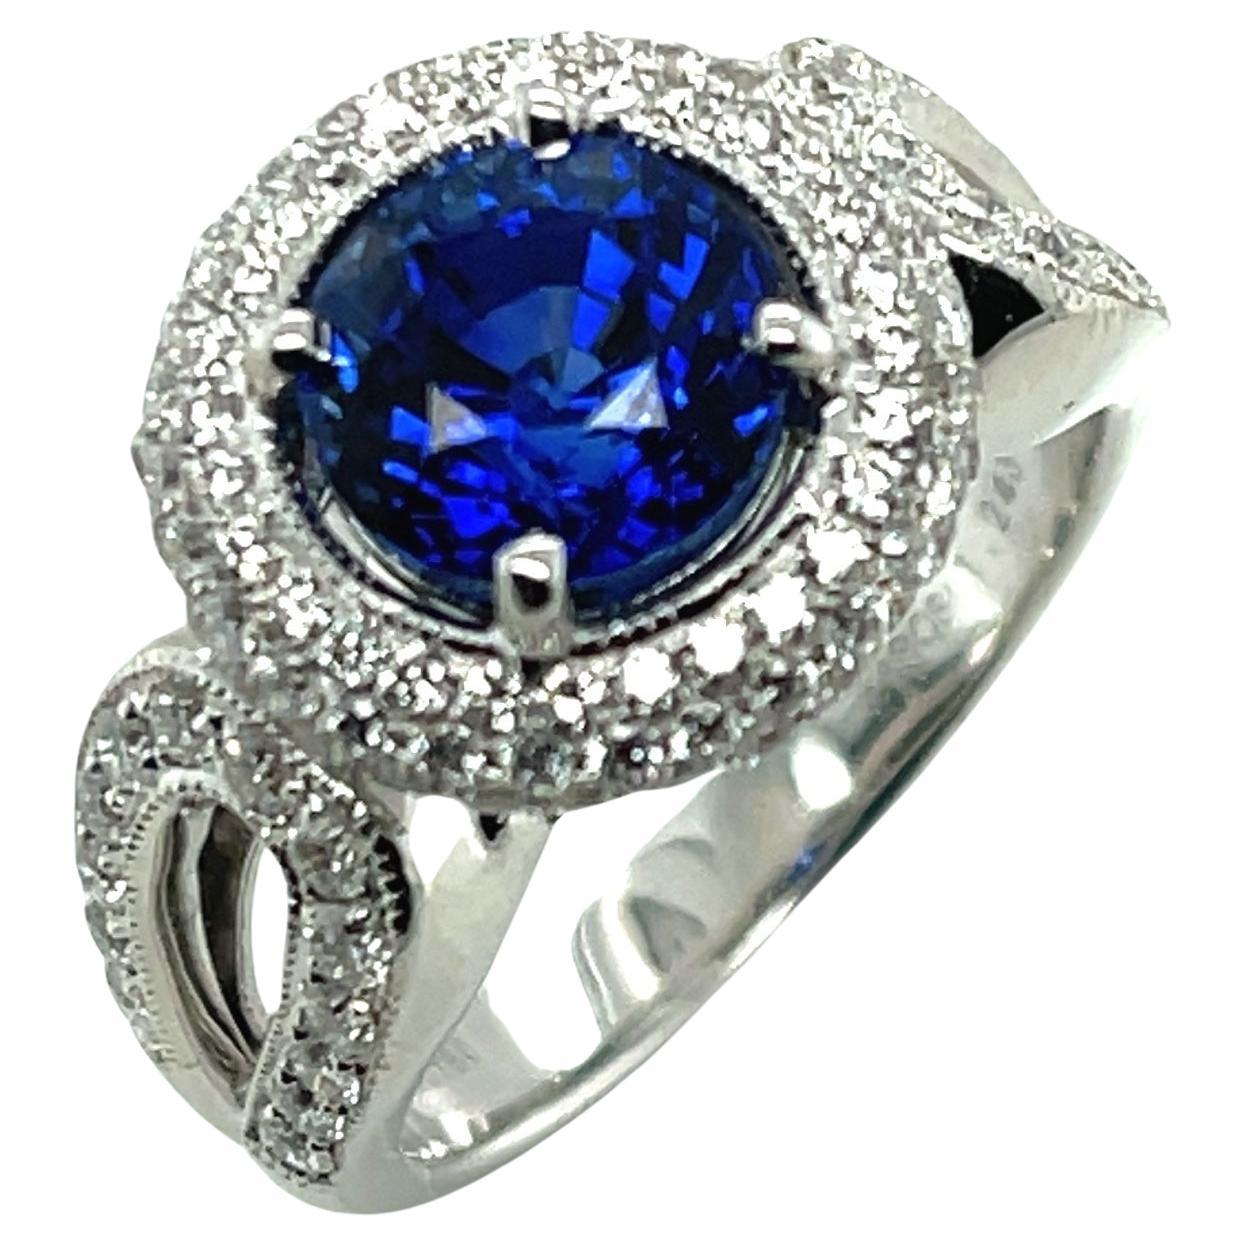 GIA Certified 3.29 Carat Round Blue Sapphire and Diamond Halo Ring in White Gold